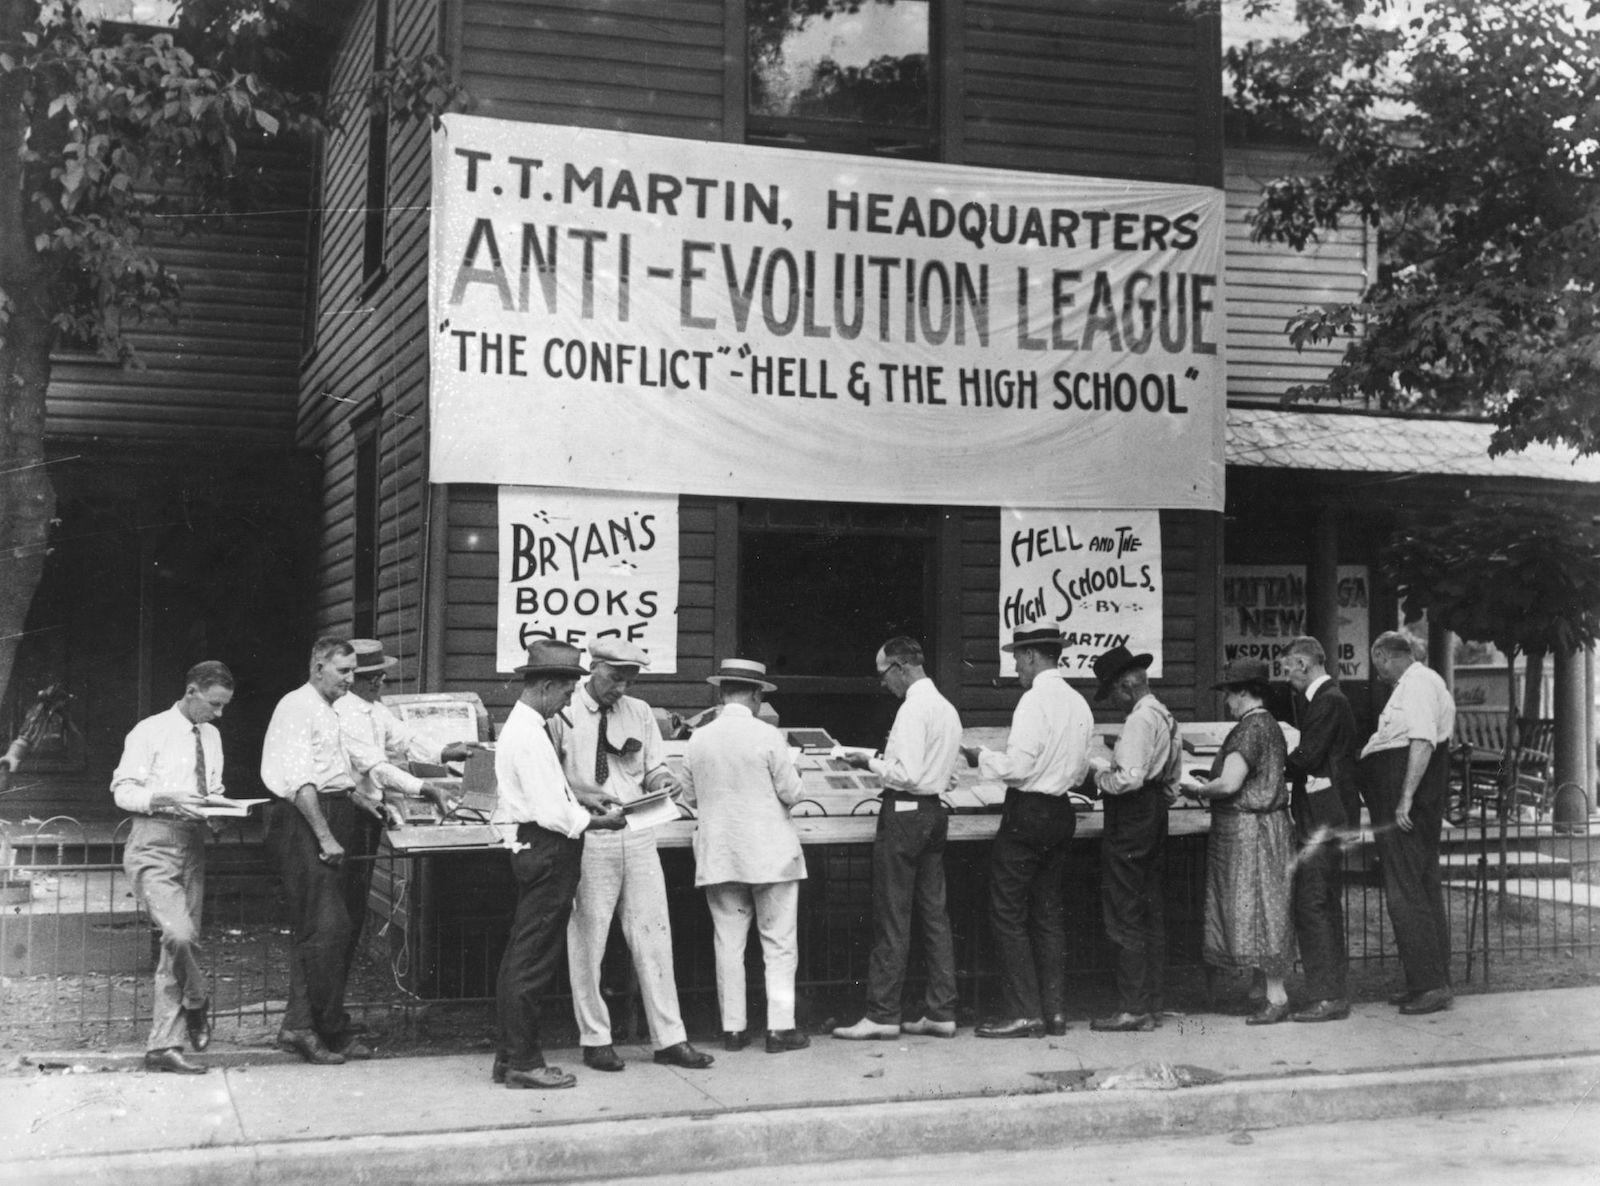 a large sign for the "anti-evolution league" hangs above a black and white scene of people in front of a book stand